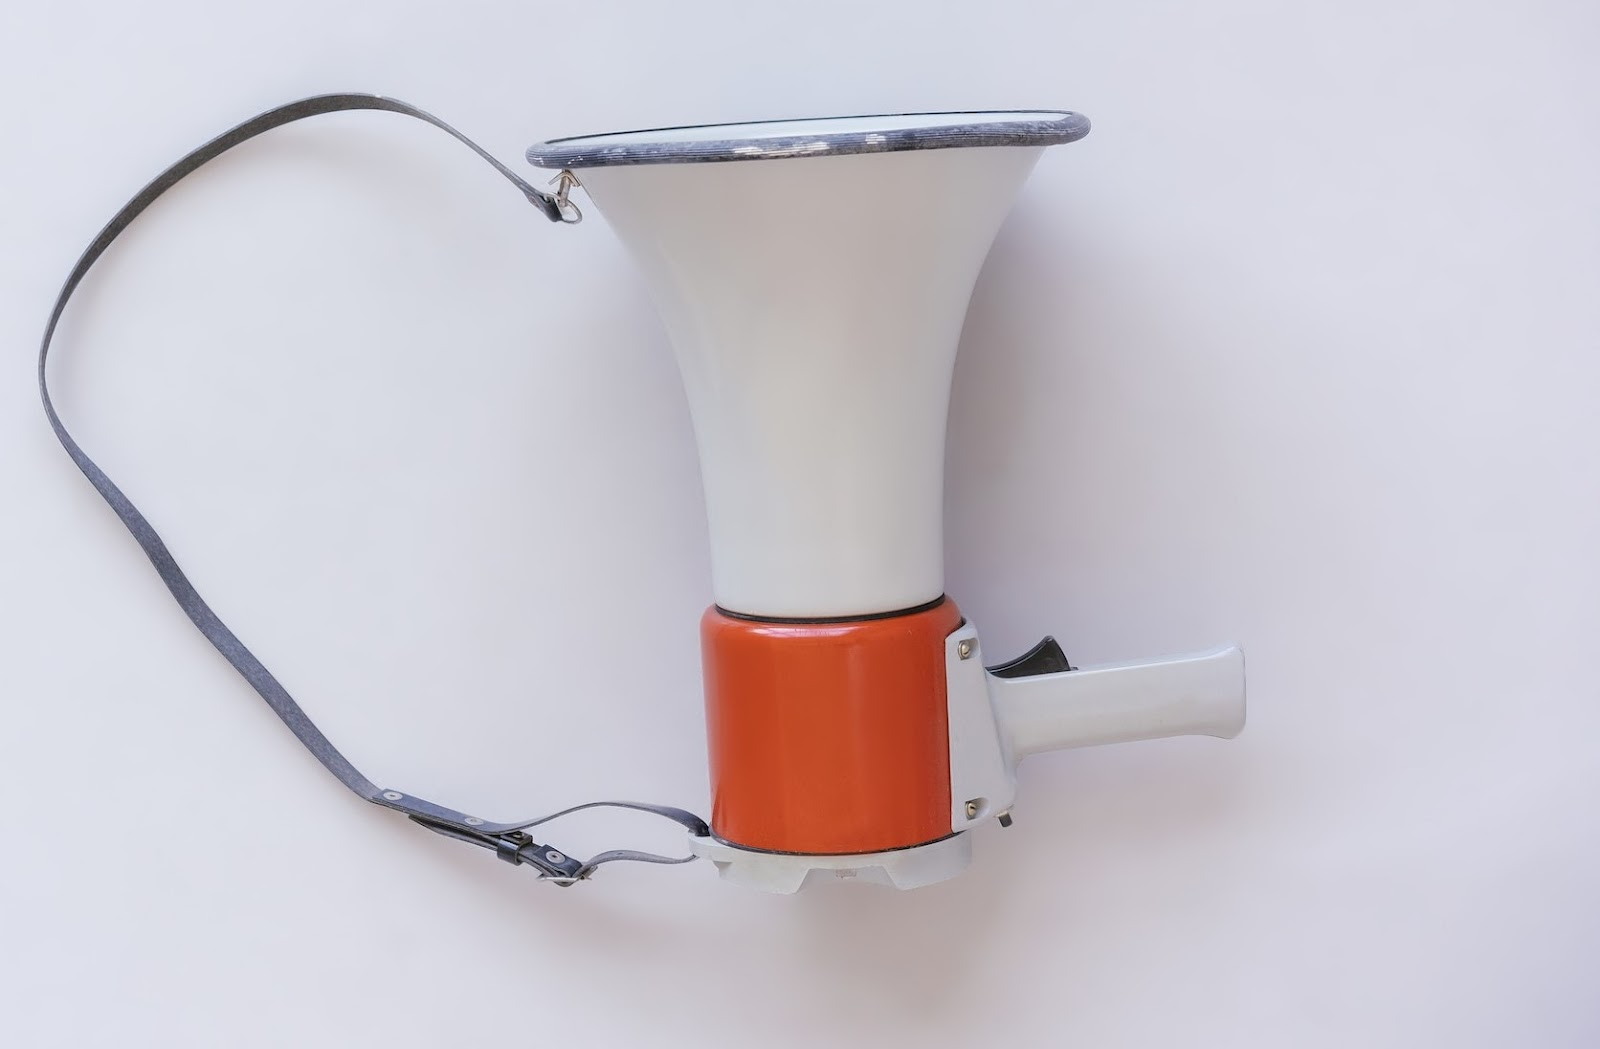 A red and white megaphone sat on a white table